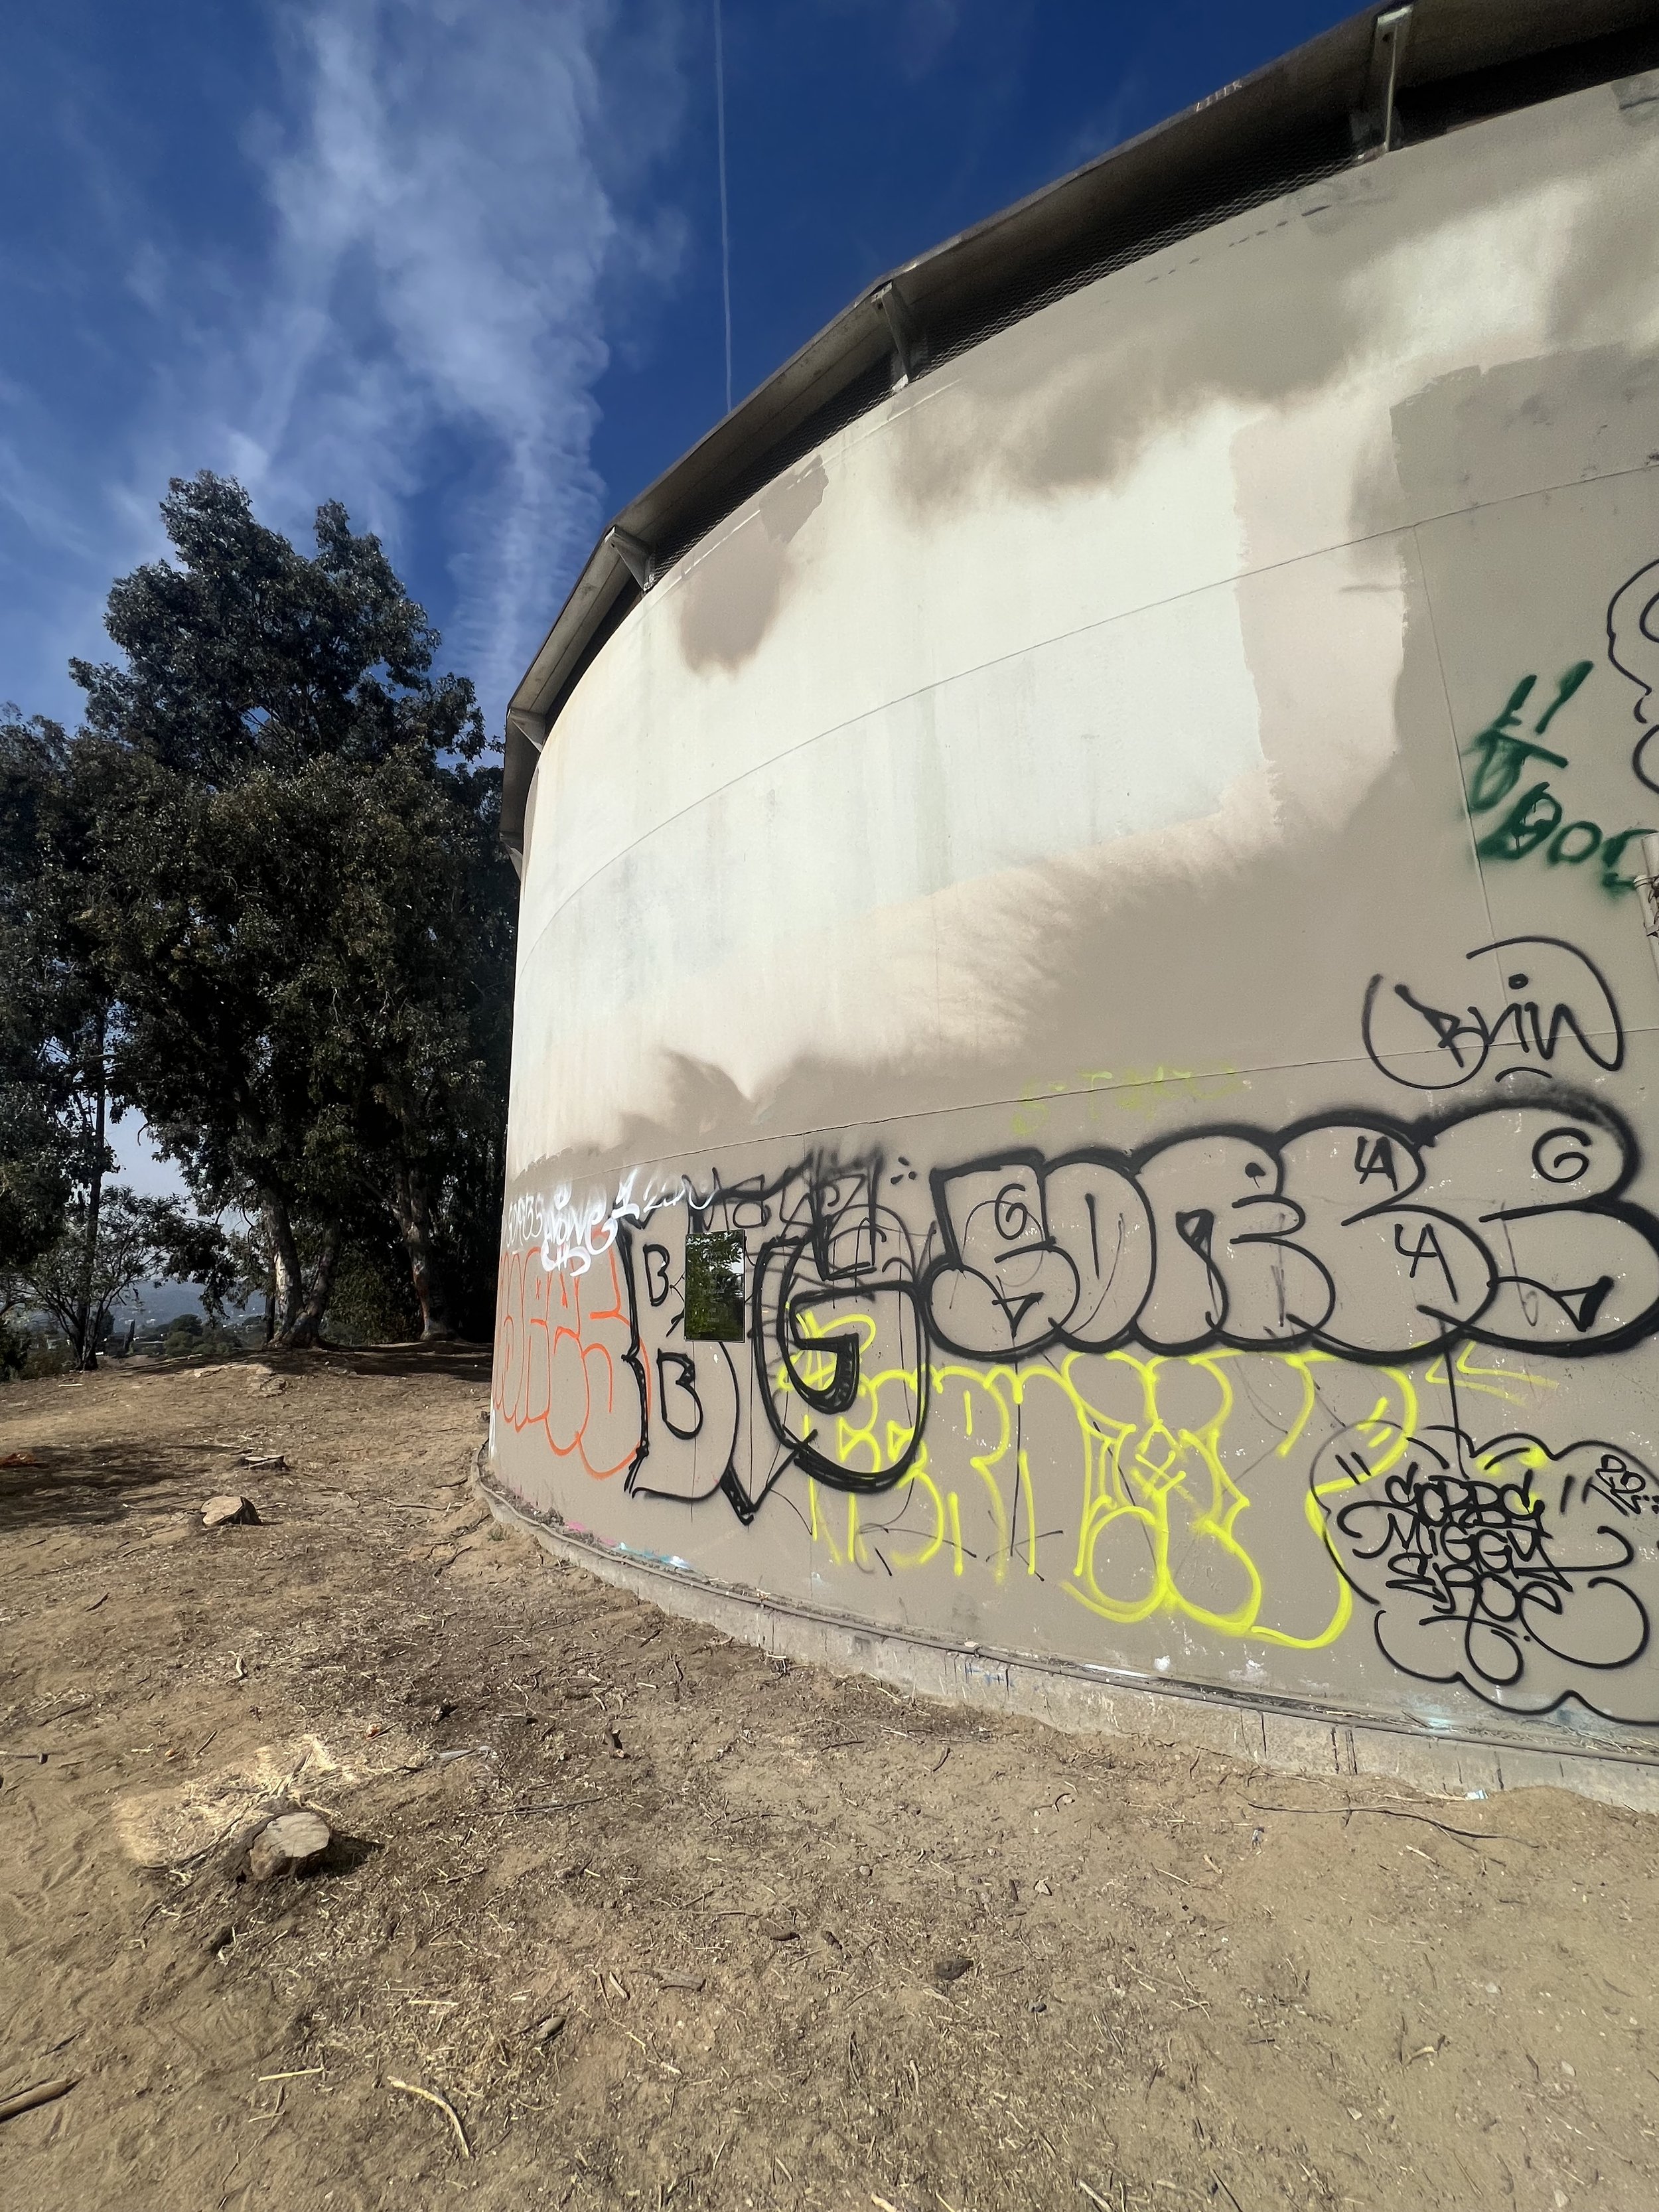 “address the death and devastation on our streets”, Elysian Park